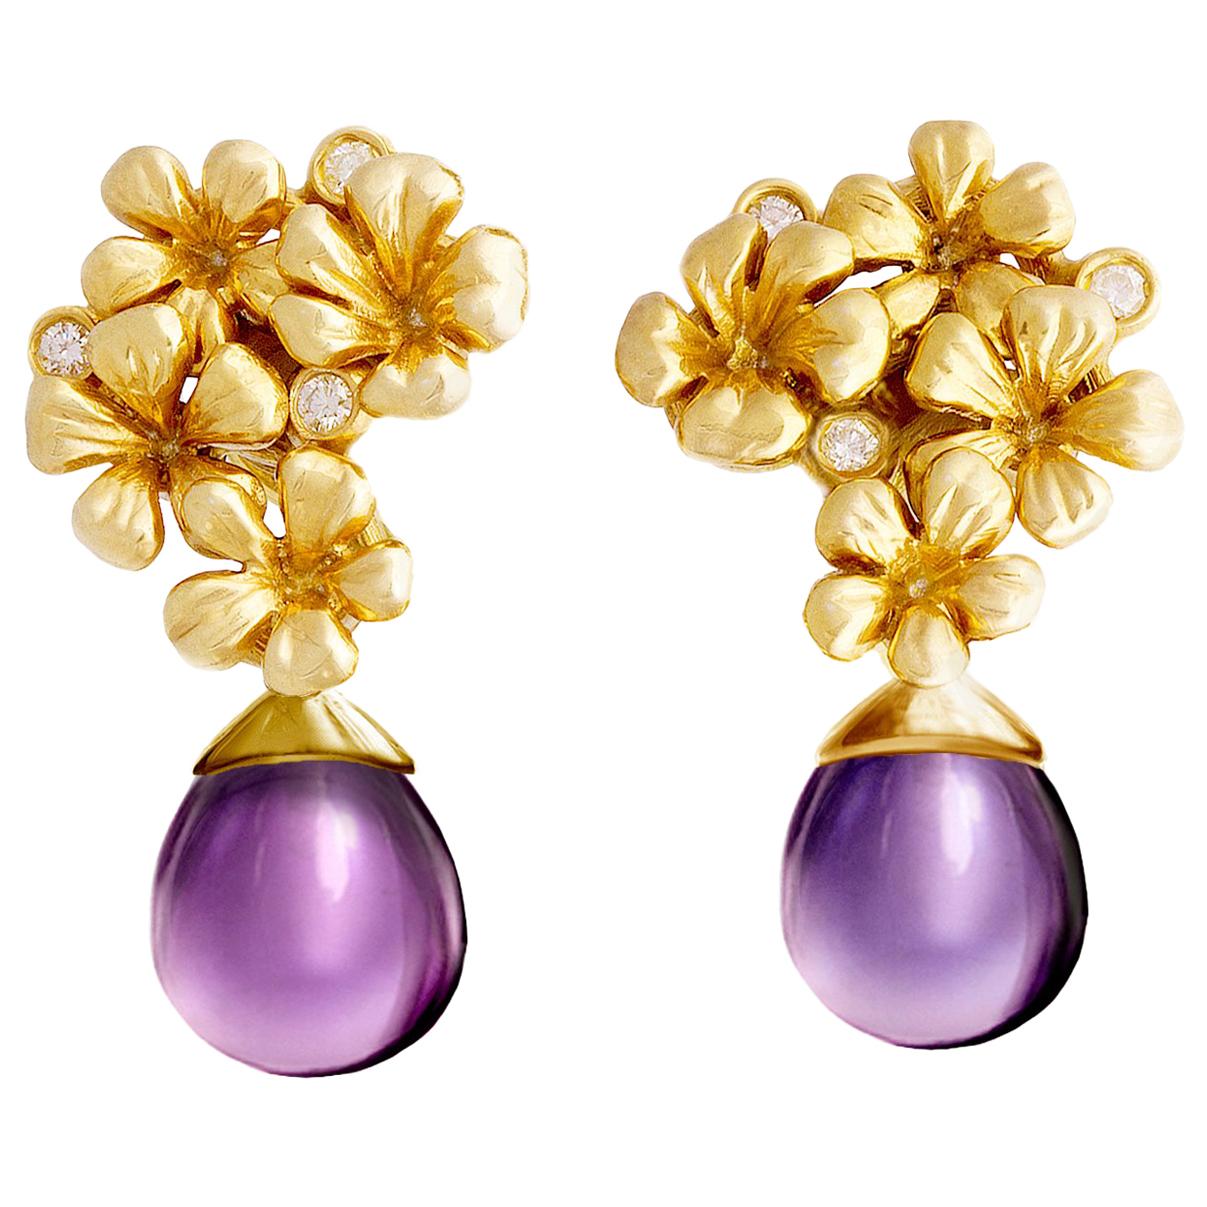 18 Karat Gold Plum Flowers Contemporary Earrings with Diamonds and Amethyst